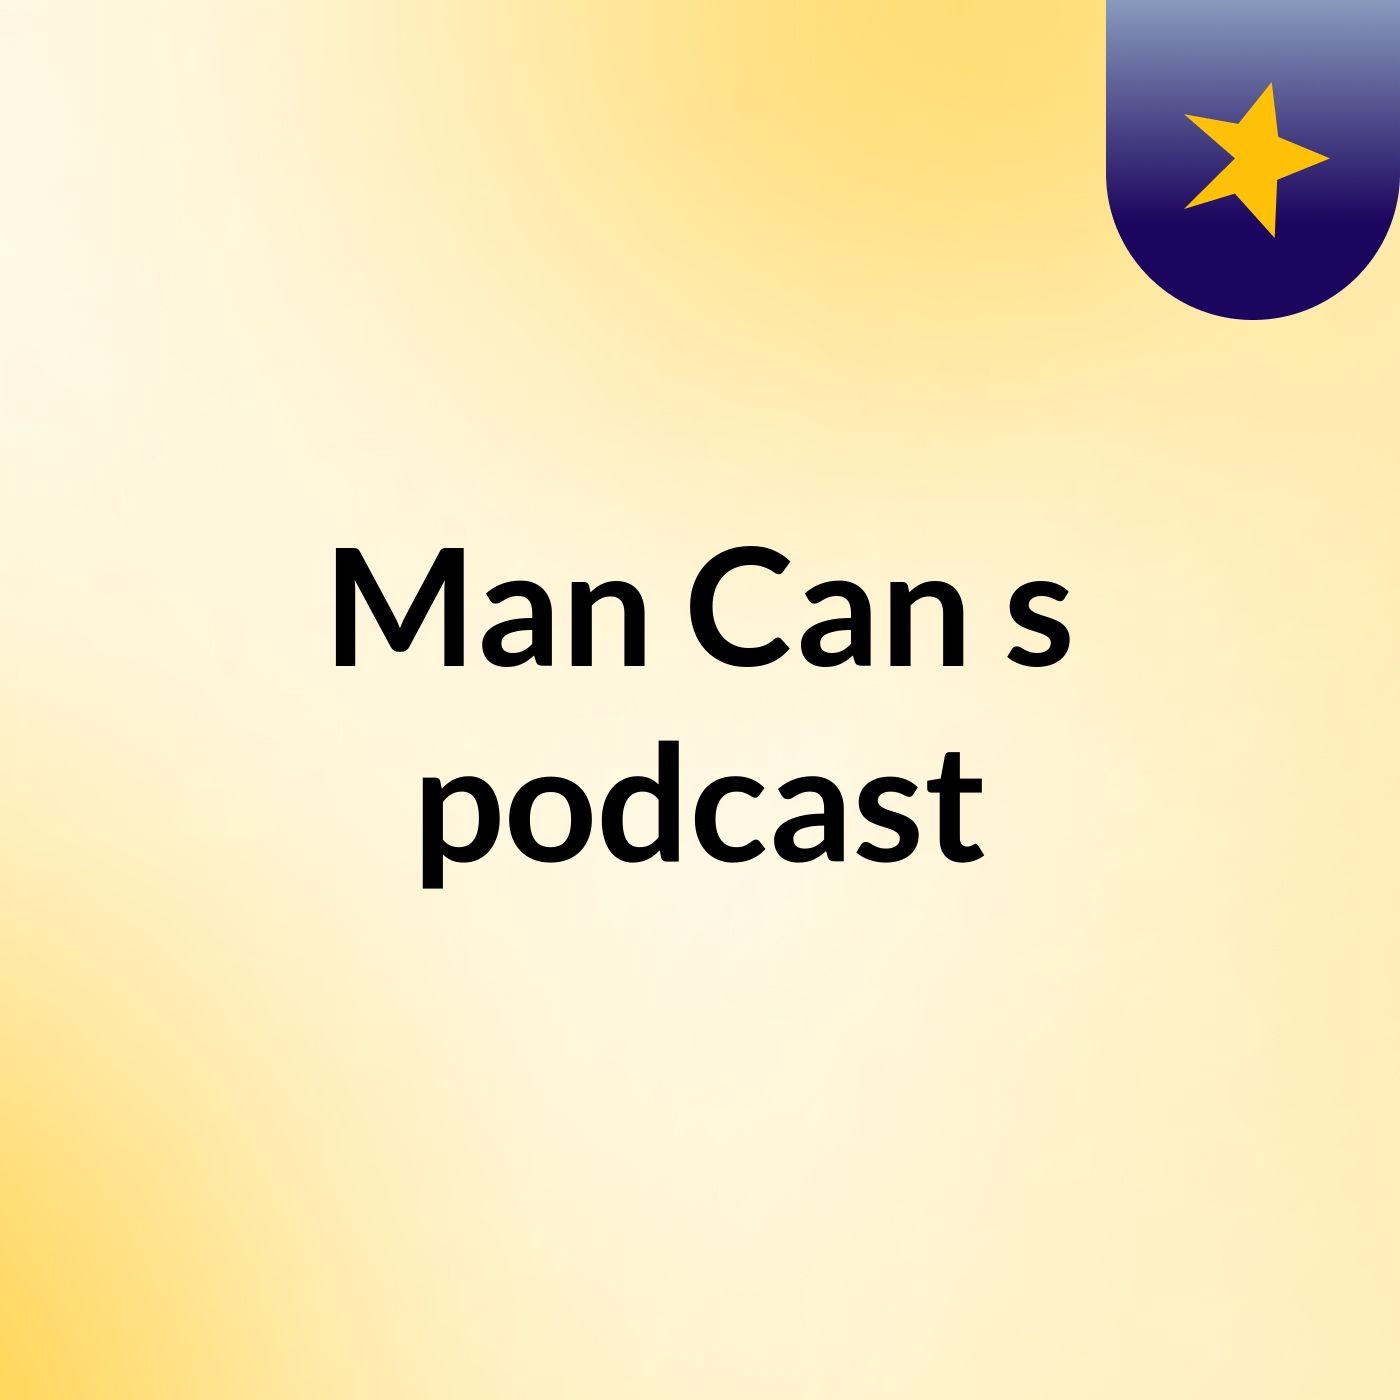 Man Can's podcast